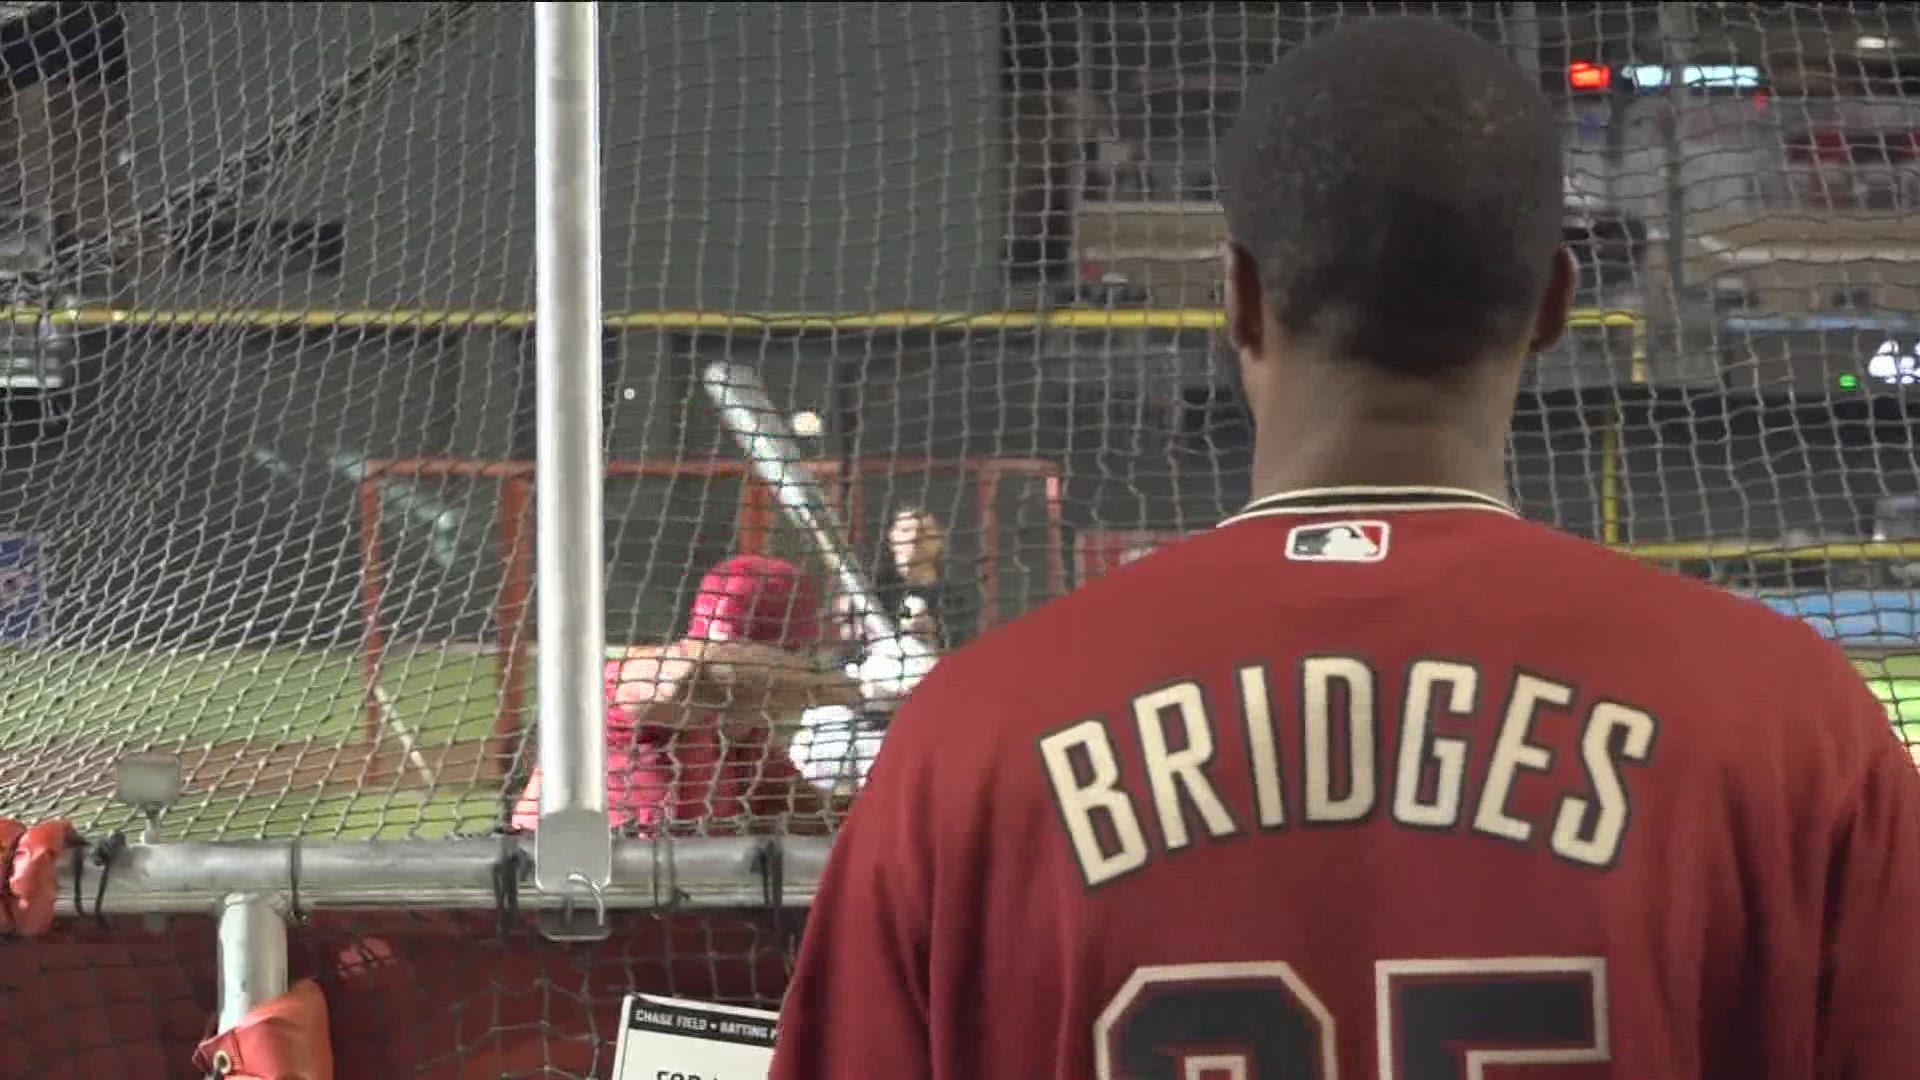 The celebration came because Bridges won a bet with the D-Backs in June and falls on his 26th birthday!